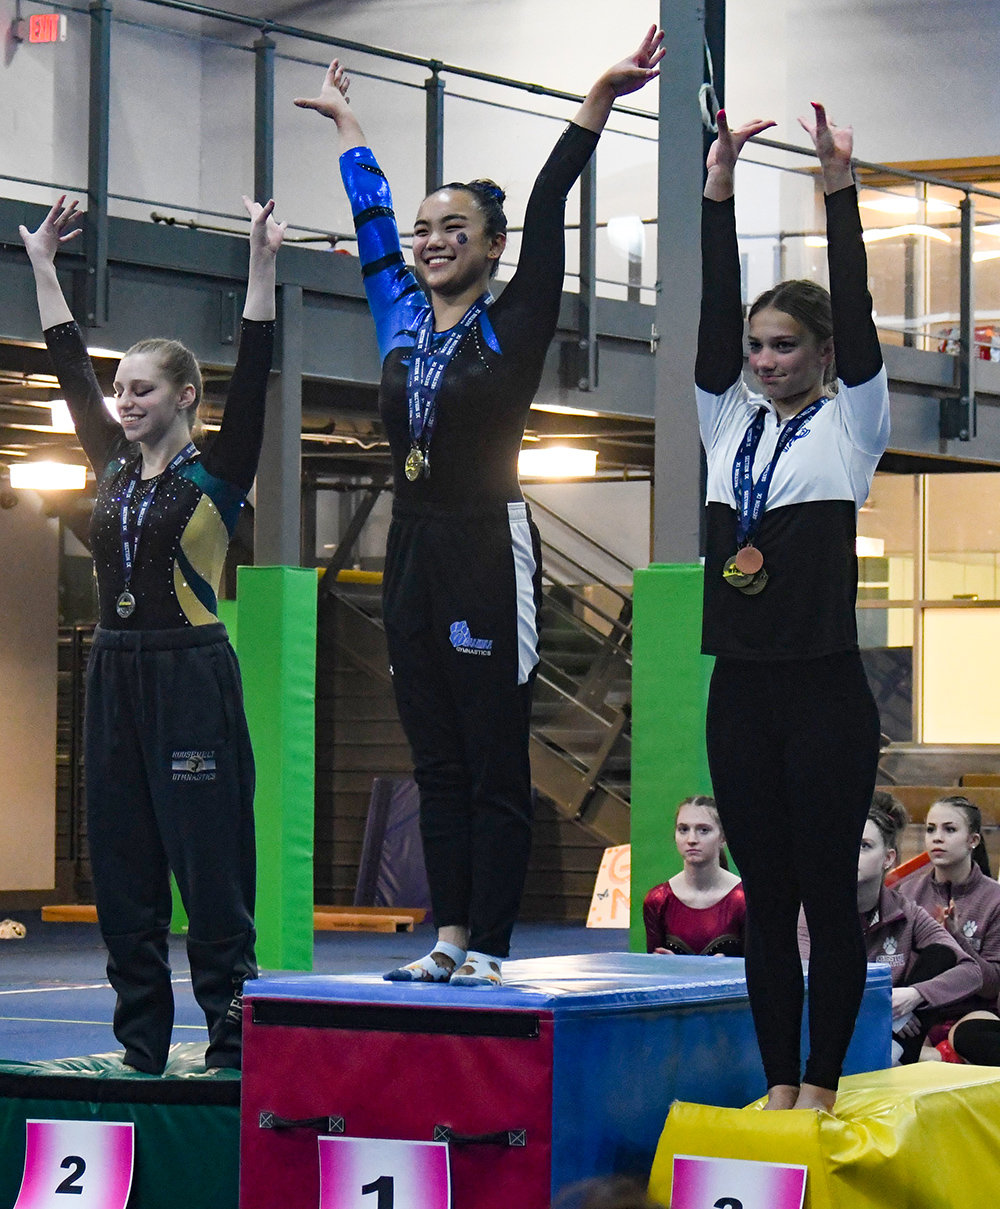 Wallkill's Marlee McCullough stands atop the balance beam podium after the Section 9 gymnastics championships on Feb. 13 at Epik Athletics in Middletown. She is flanked by FDR's Emma Jaeger, left, and Reilly Benson.